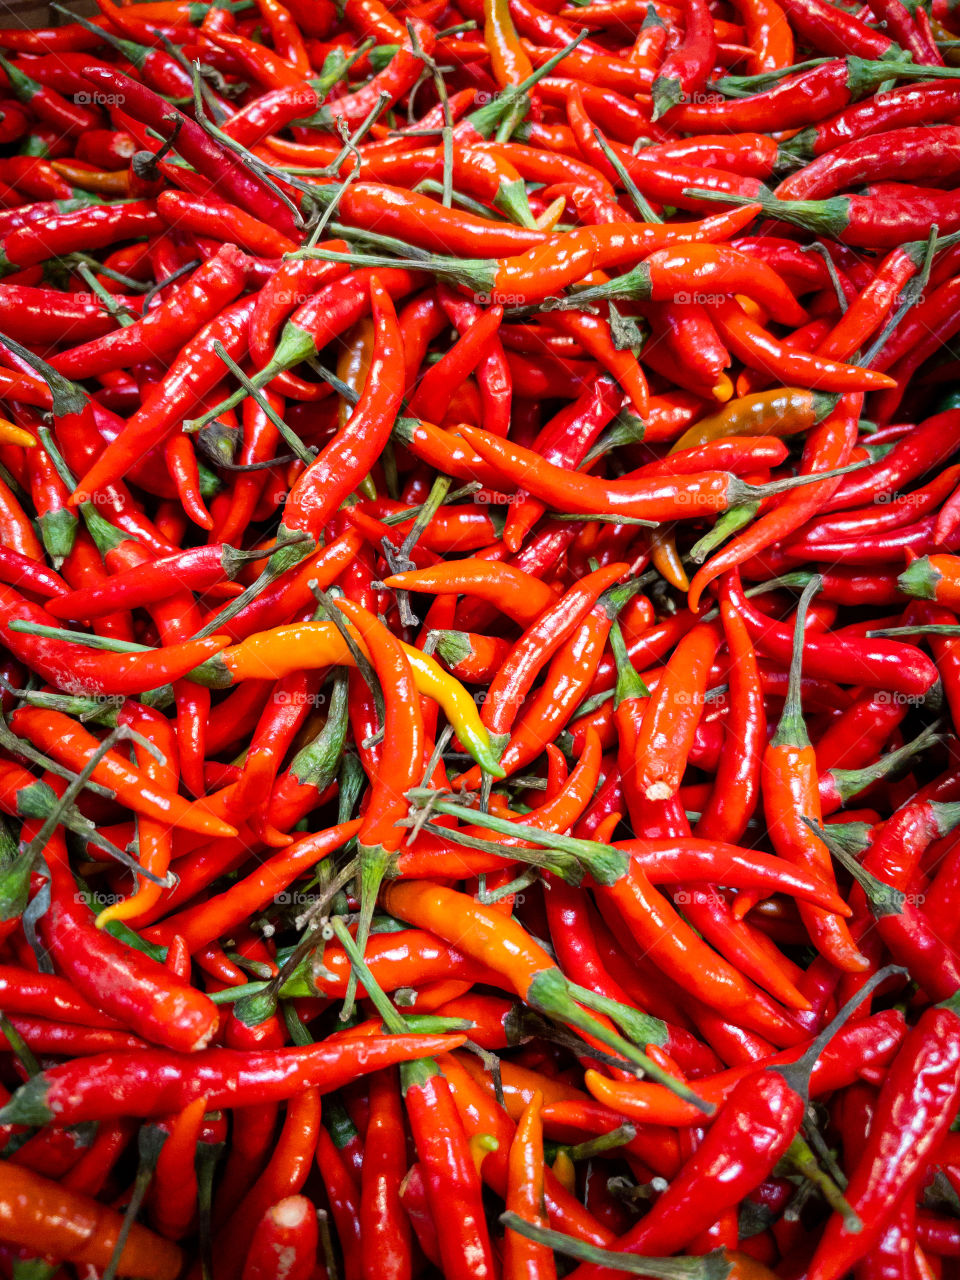 Bright red and orange chili peppers wait for the discerning chef to come buy them and turn them into a delicious dinner!